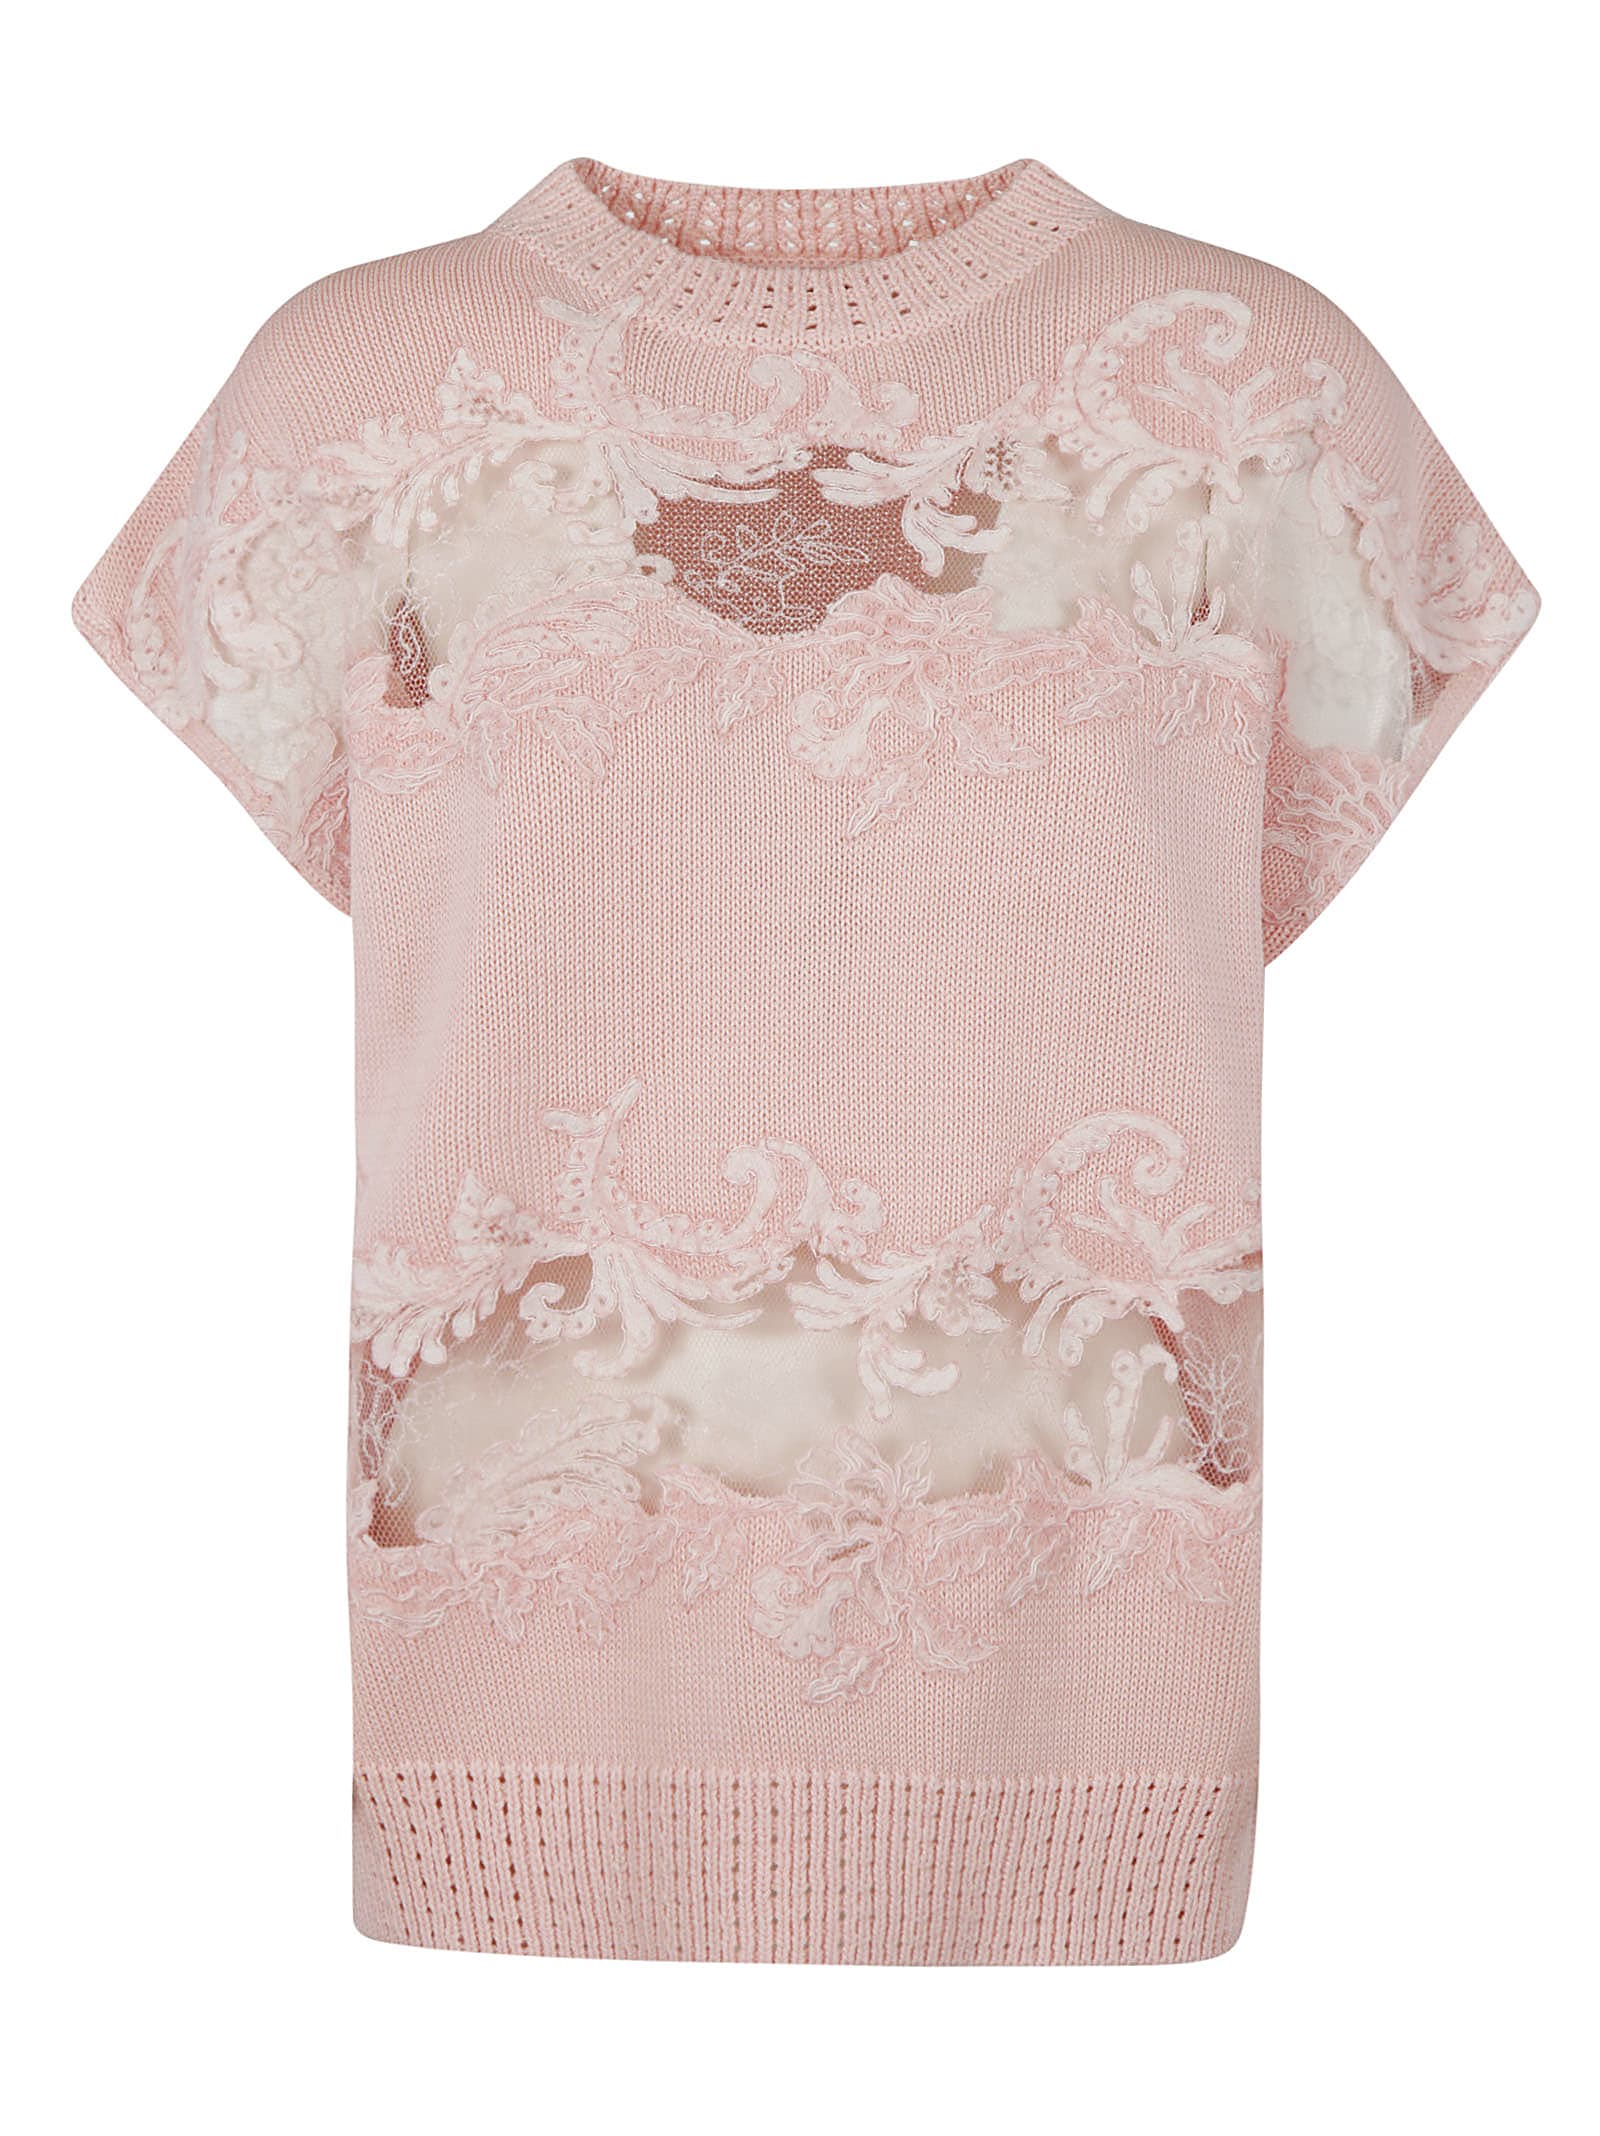 Ermanno Scervino Floral Embroidered Cut-out Detail Sweatshirt In Pale Blush